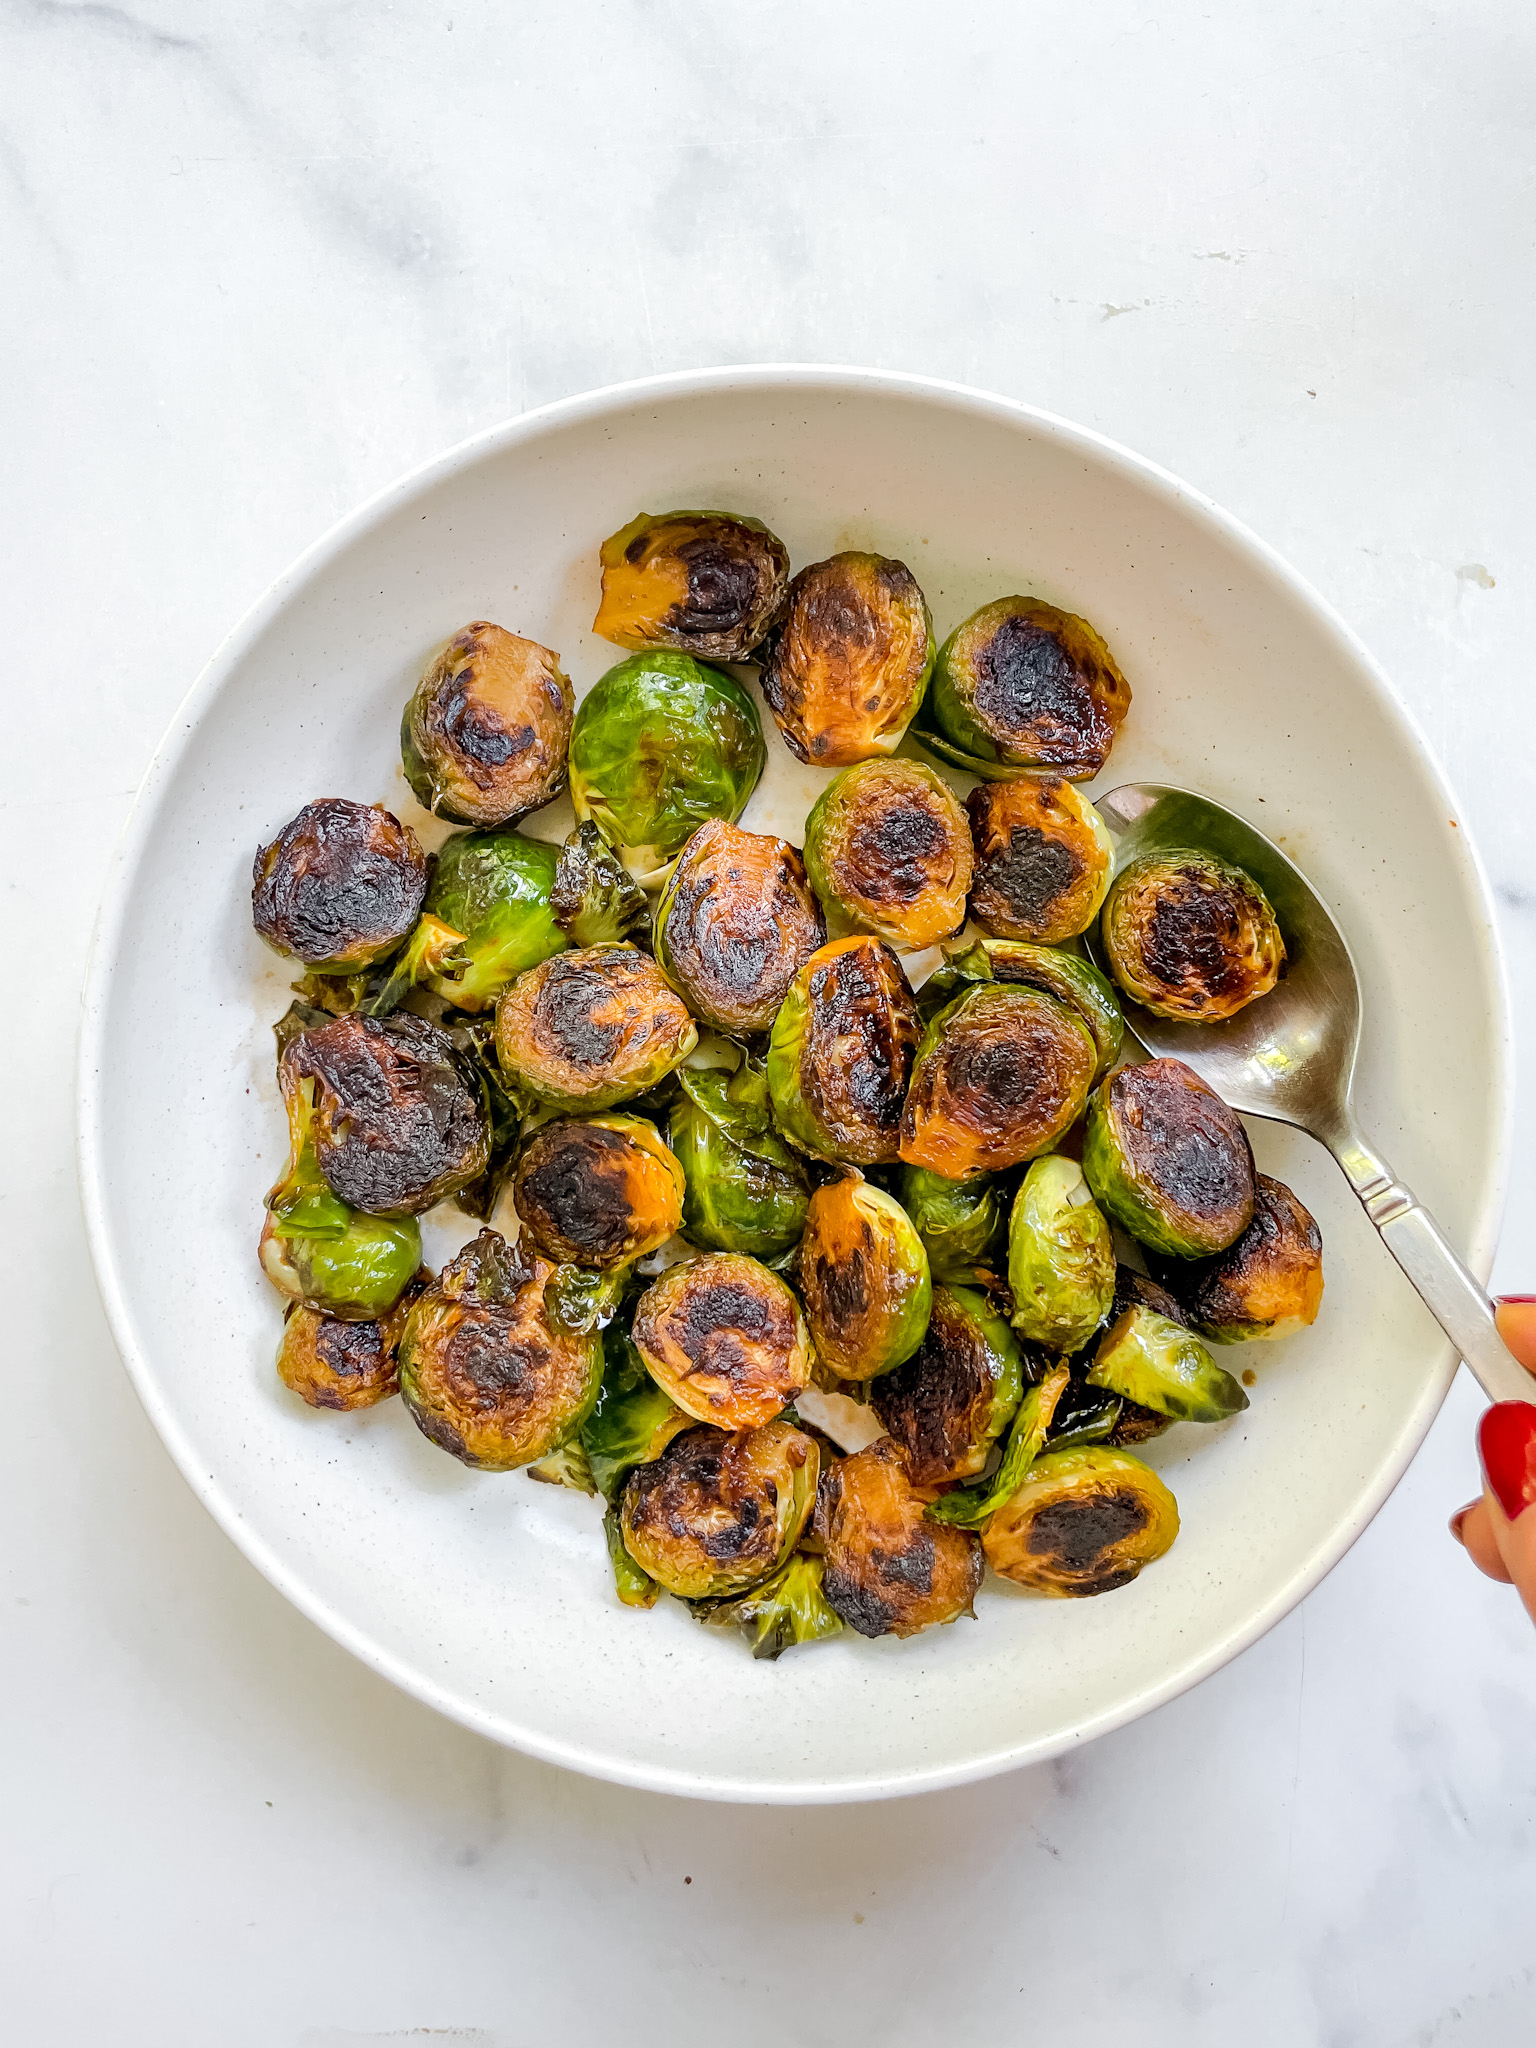 Chili Caramel Brussels Sprouts (Gluten-Free, Dairy-Free, Refined Sugar Free)